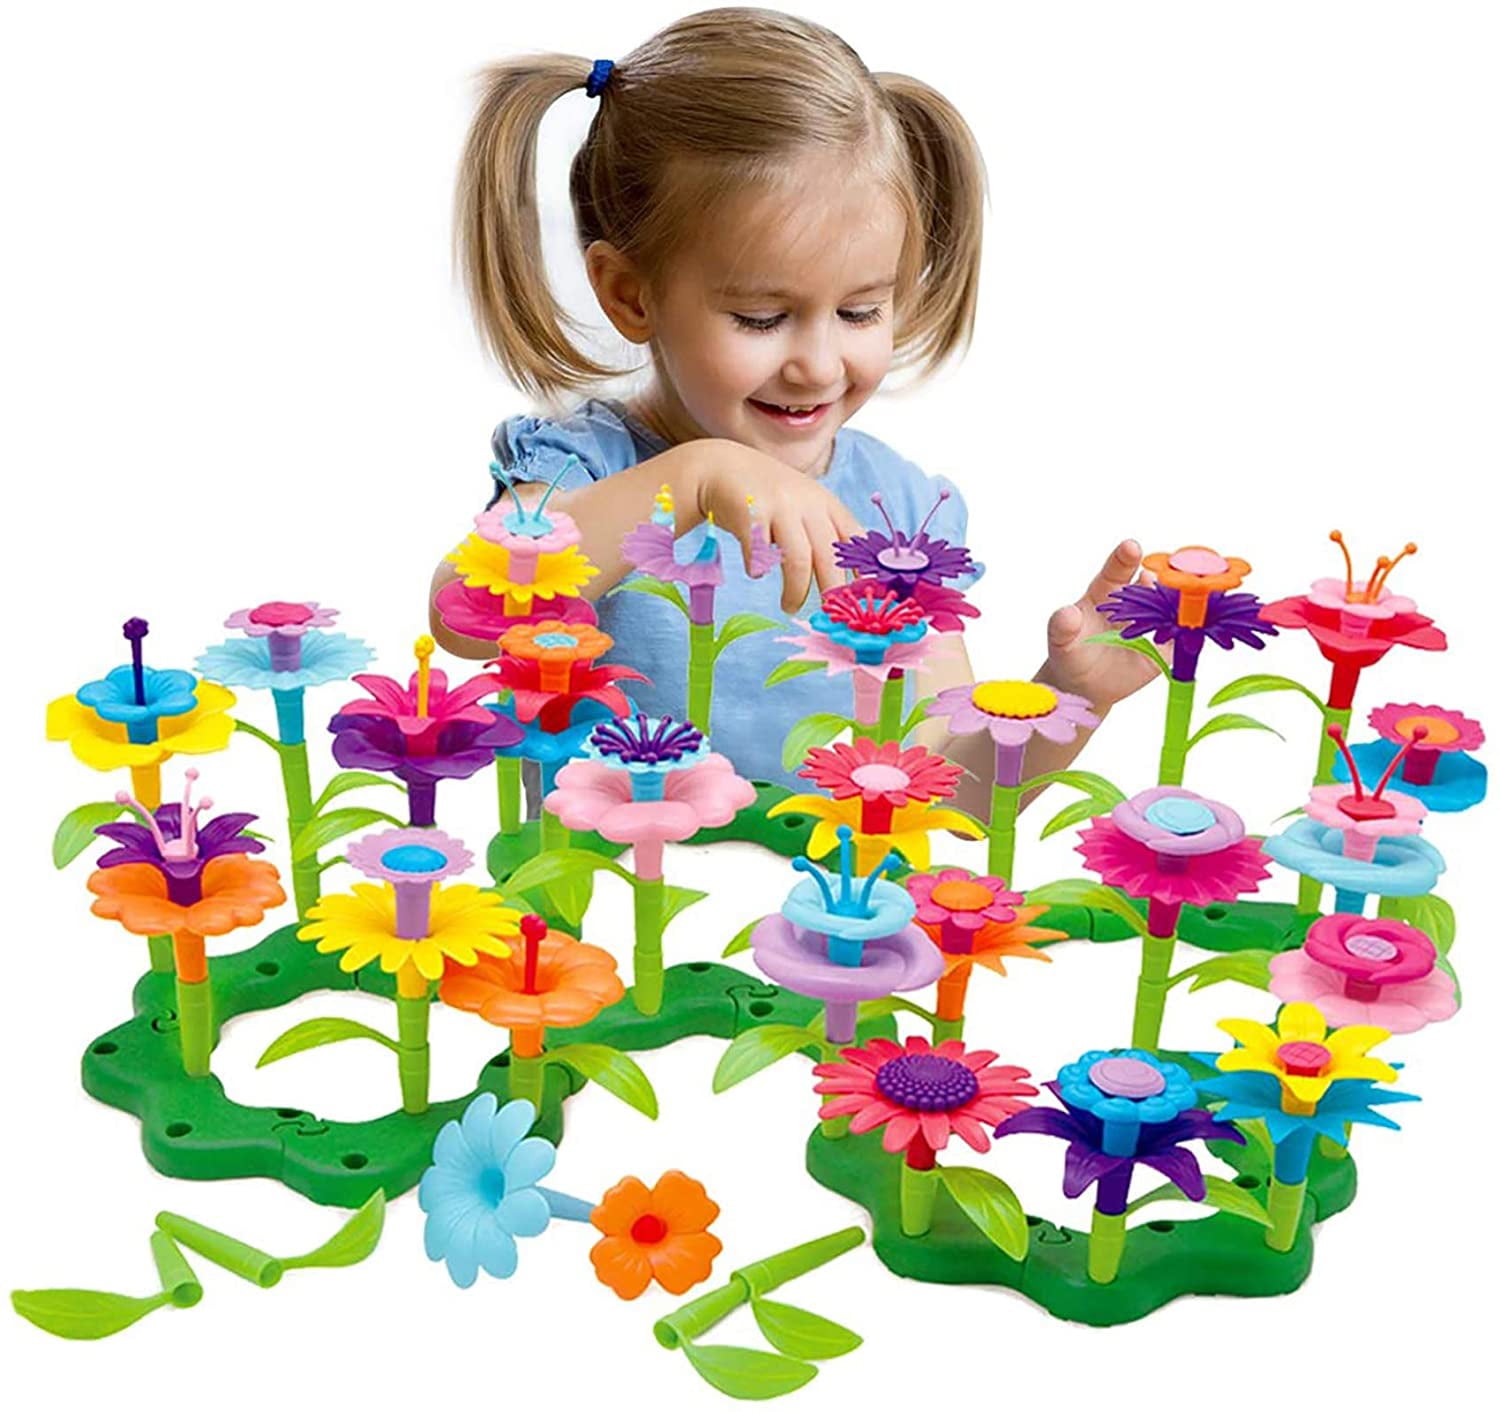 Details about   Fisher Price Little People Builder Flower Shop Stacking Building Flower Bunch 